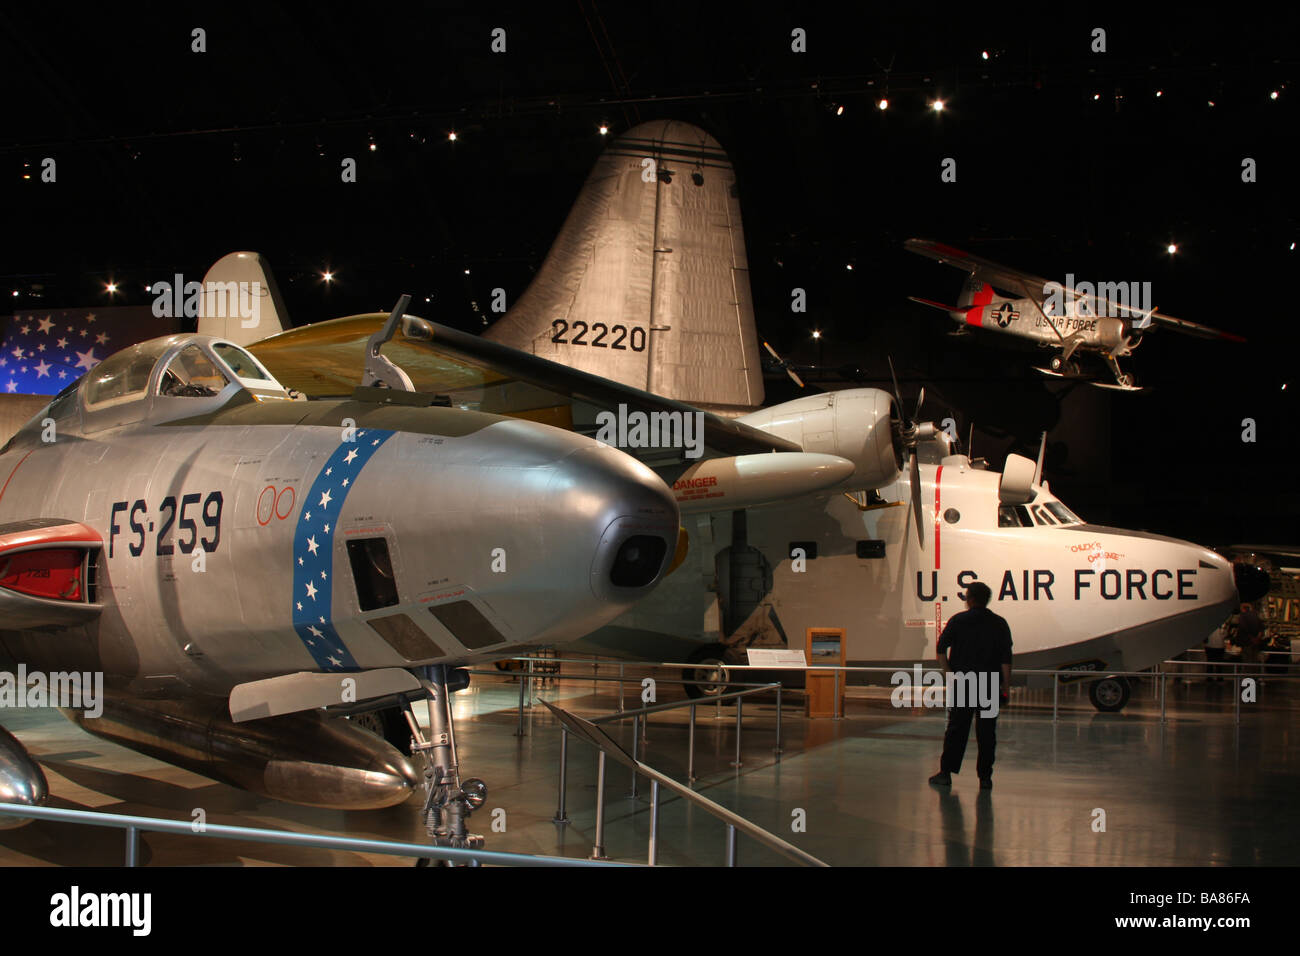 United States Air Force Museum Dayton, Ohio Wright Patterson base Foto Stock